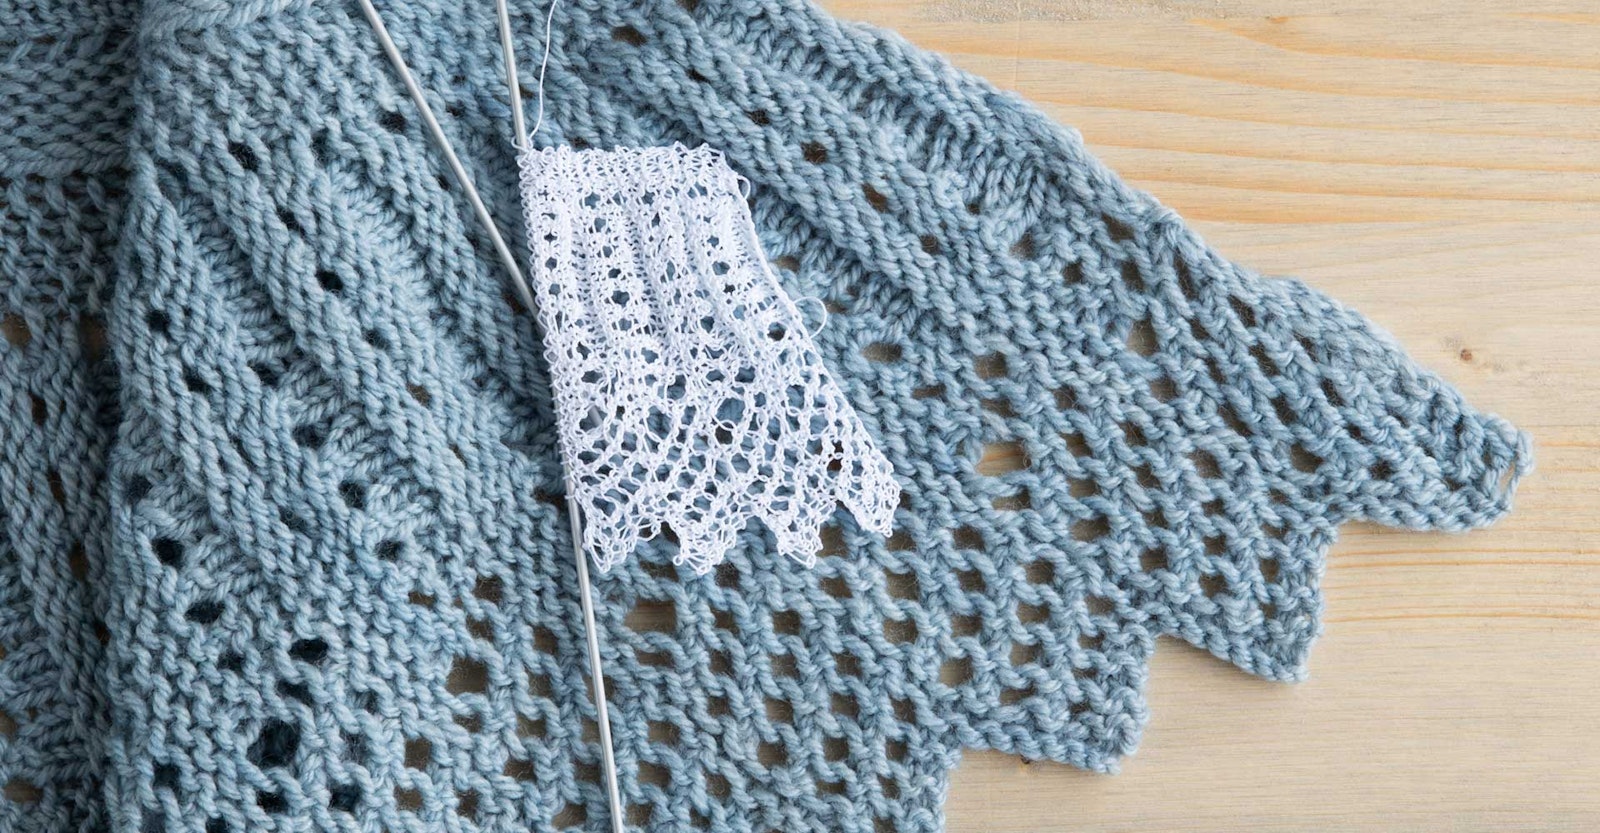 Exploring Lace: Beginner Lace Knitting Patterns